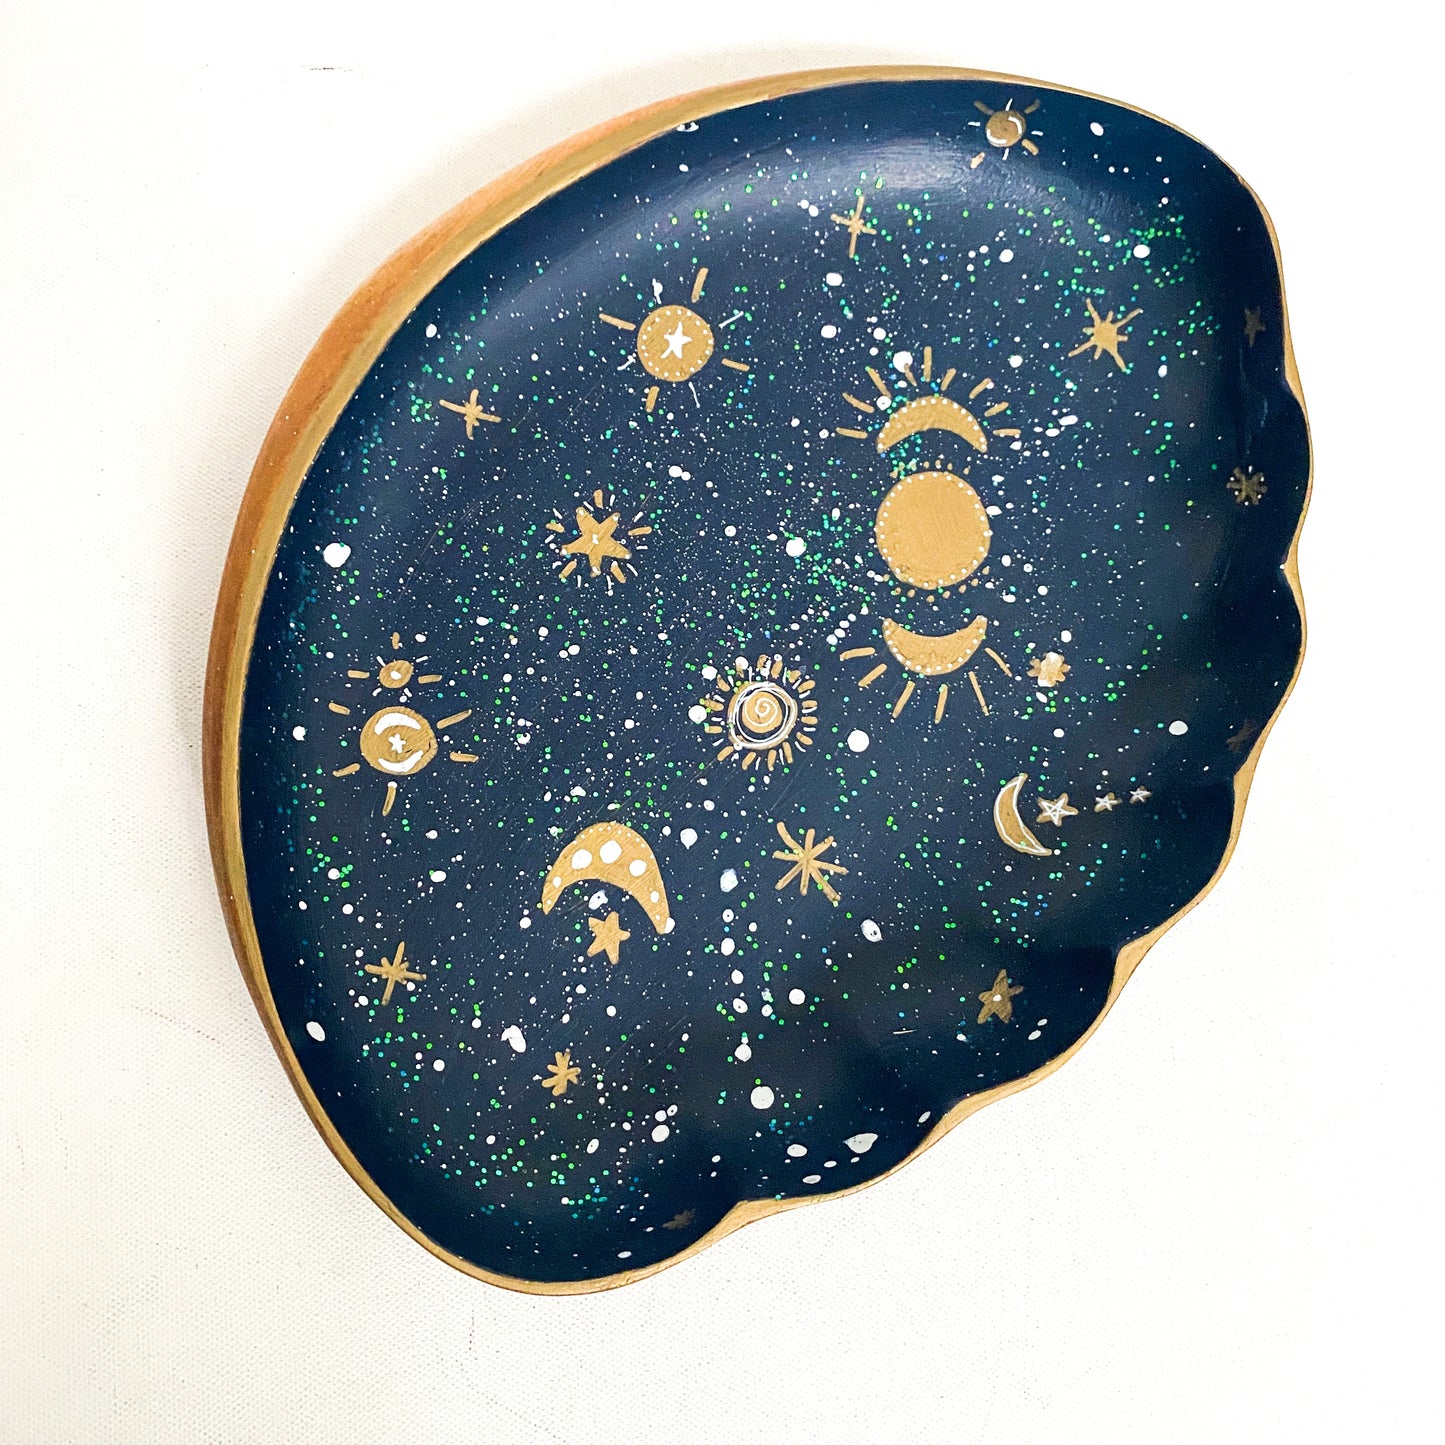 Sun, Moon and Stars, Celestial Hand Painted Vintage Wood Bowl, Scalloped Monkeypod Tray